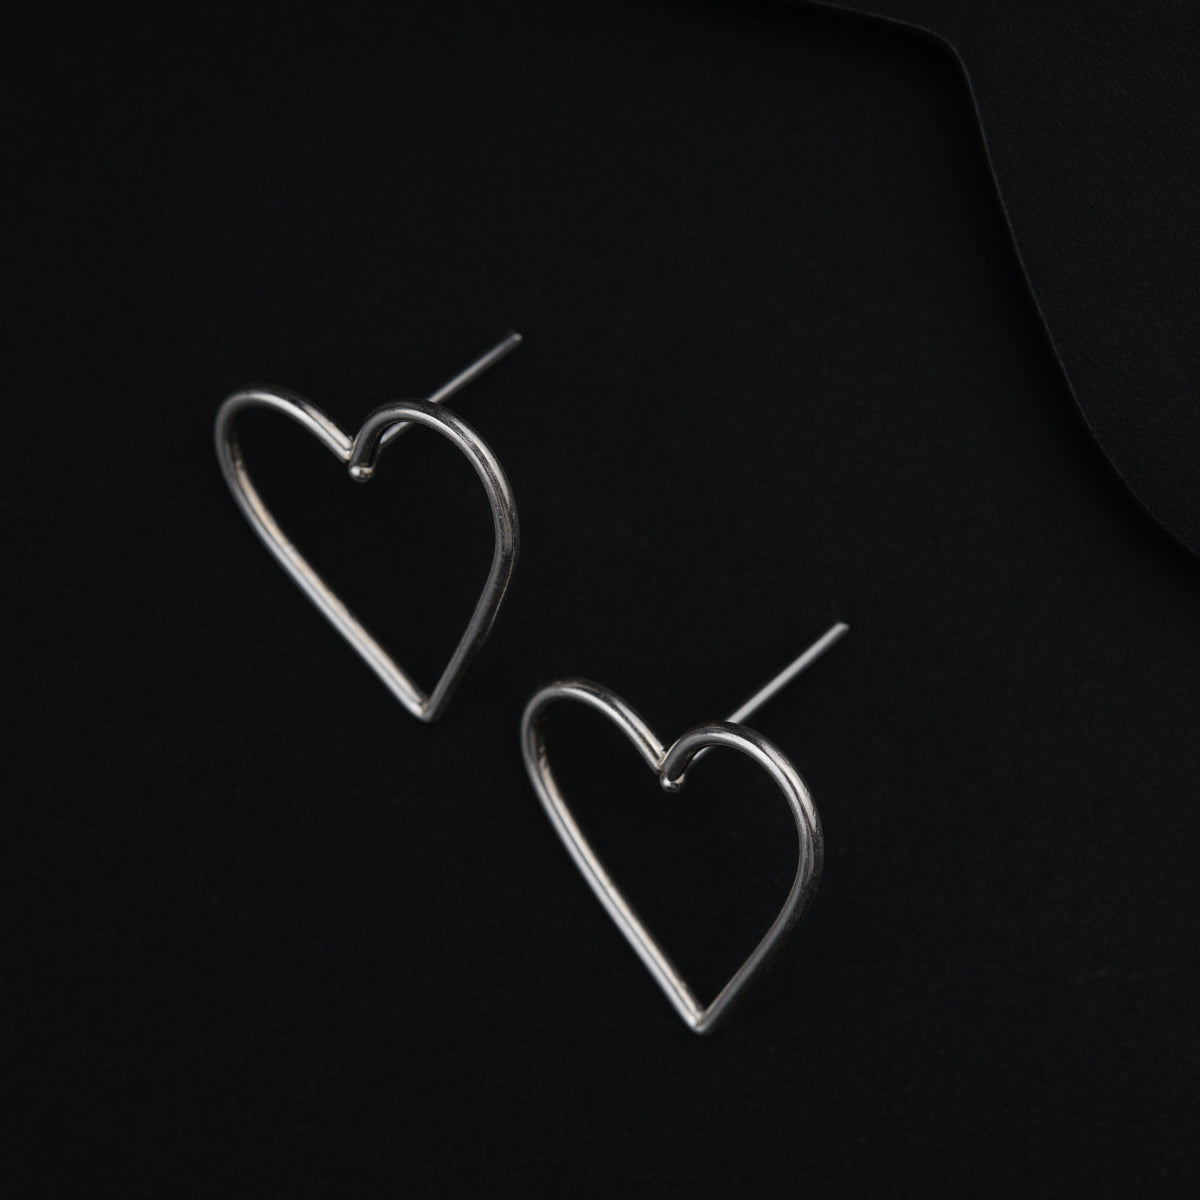 a pair of heart shaped earrings on a black background